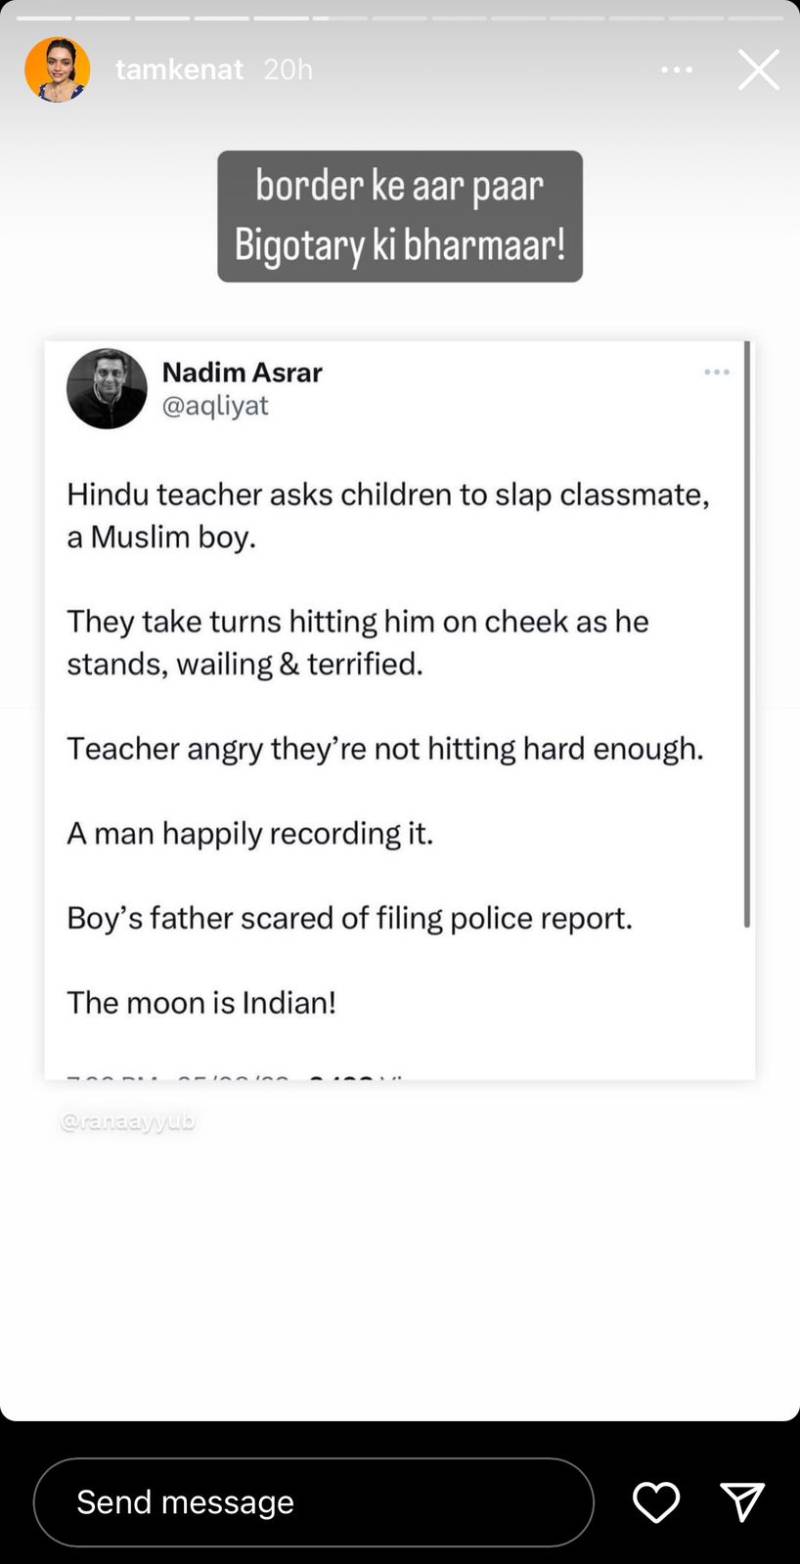 Celebs outraged by Hindu teacher's mistreatment of Muslim student in India